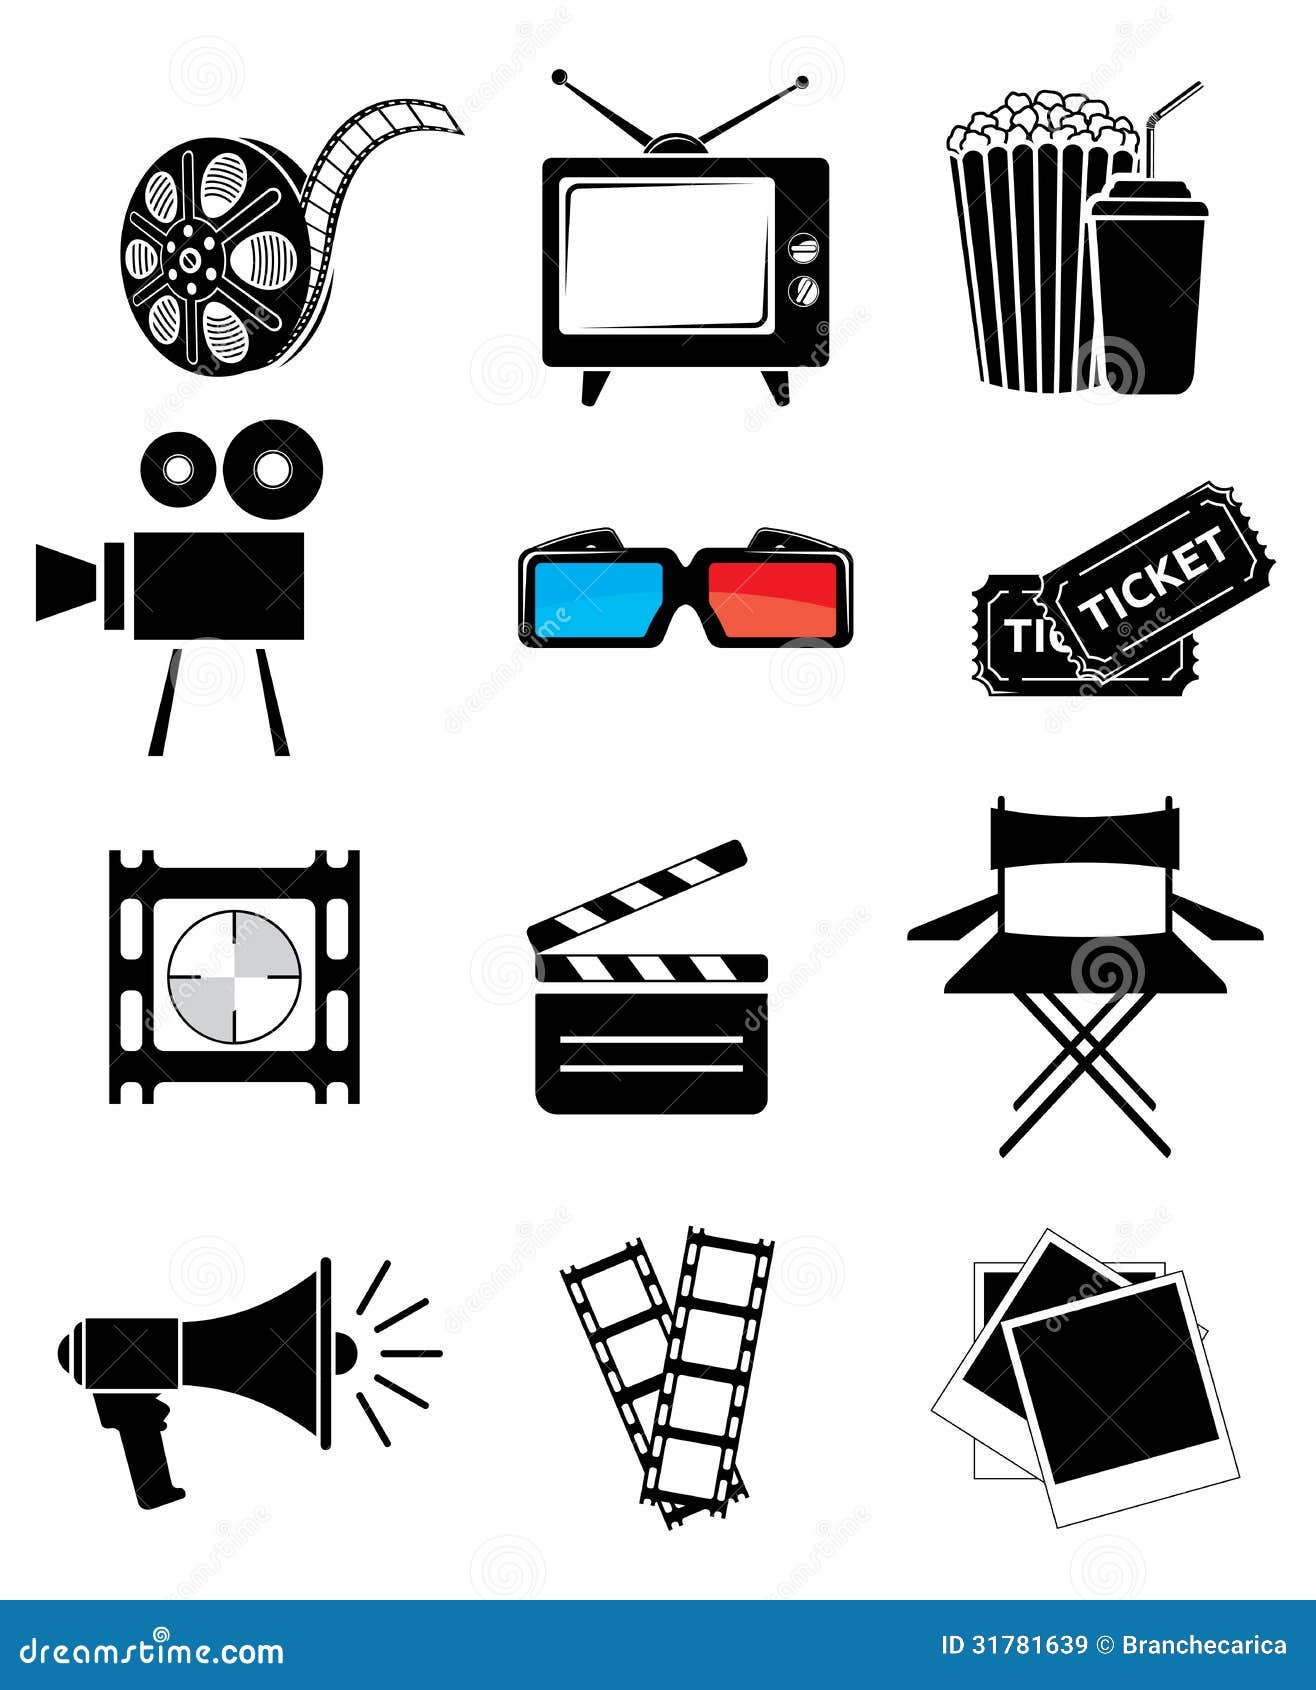 royalty free icons and clipart stock images - photo #15